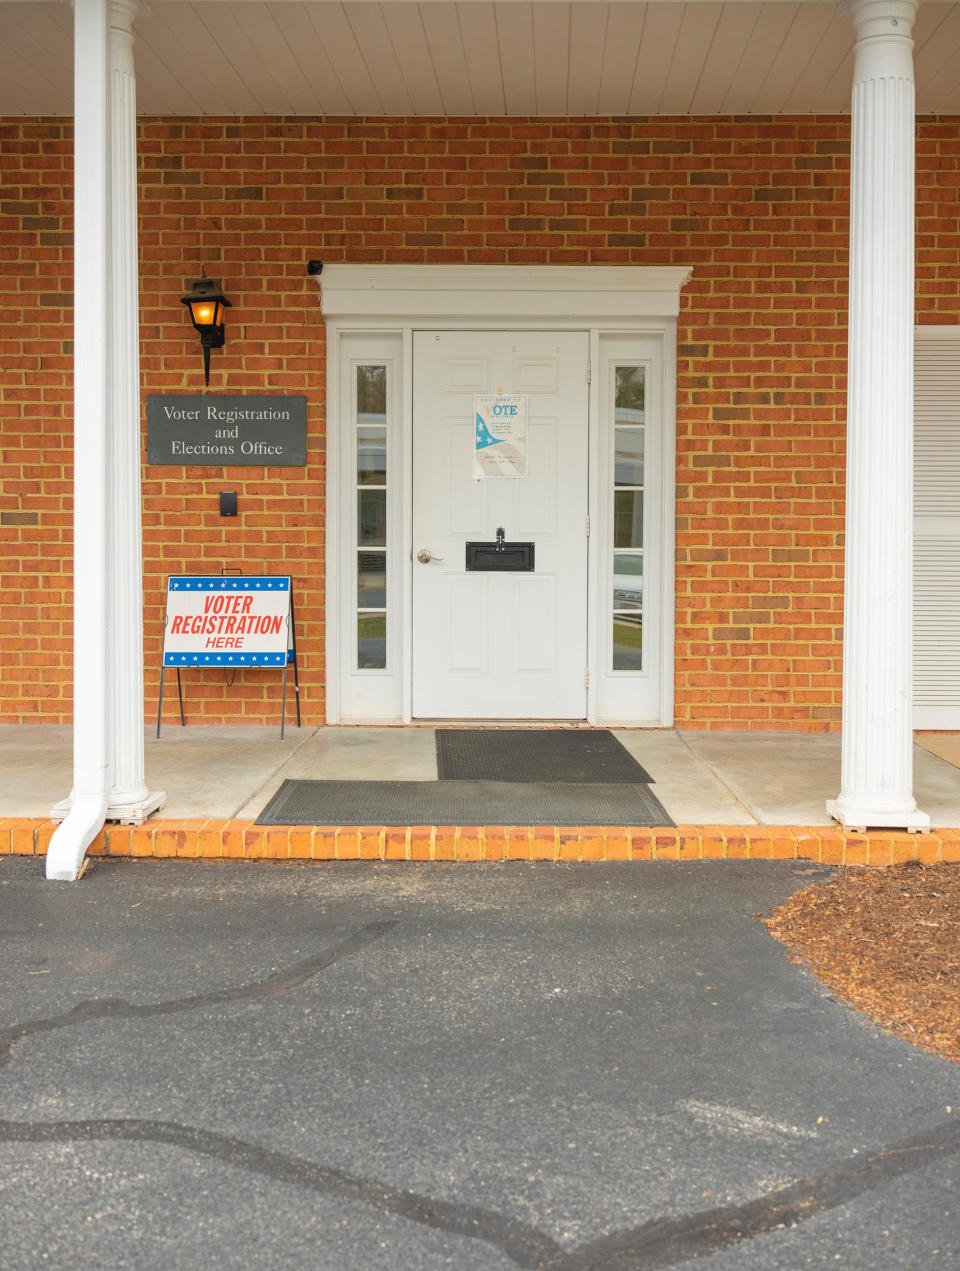 The Voter Registration and Elections Office in Buckingham, Va. (Matt Eich for NBC News)